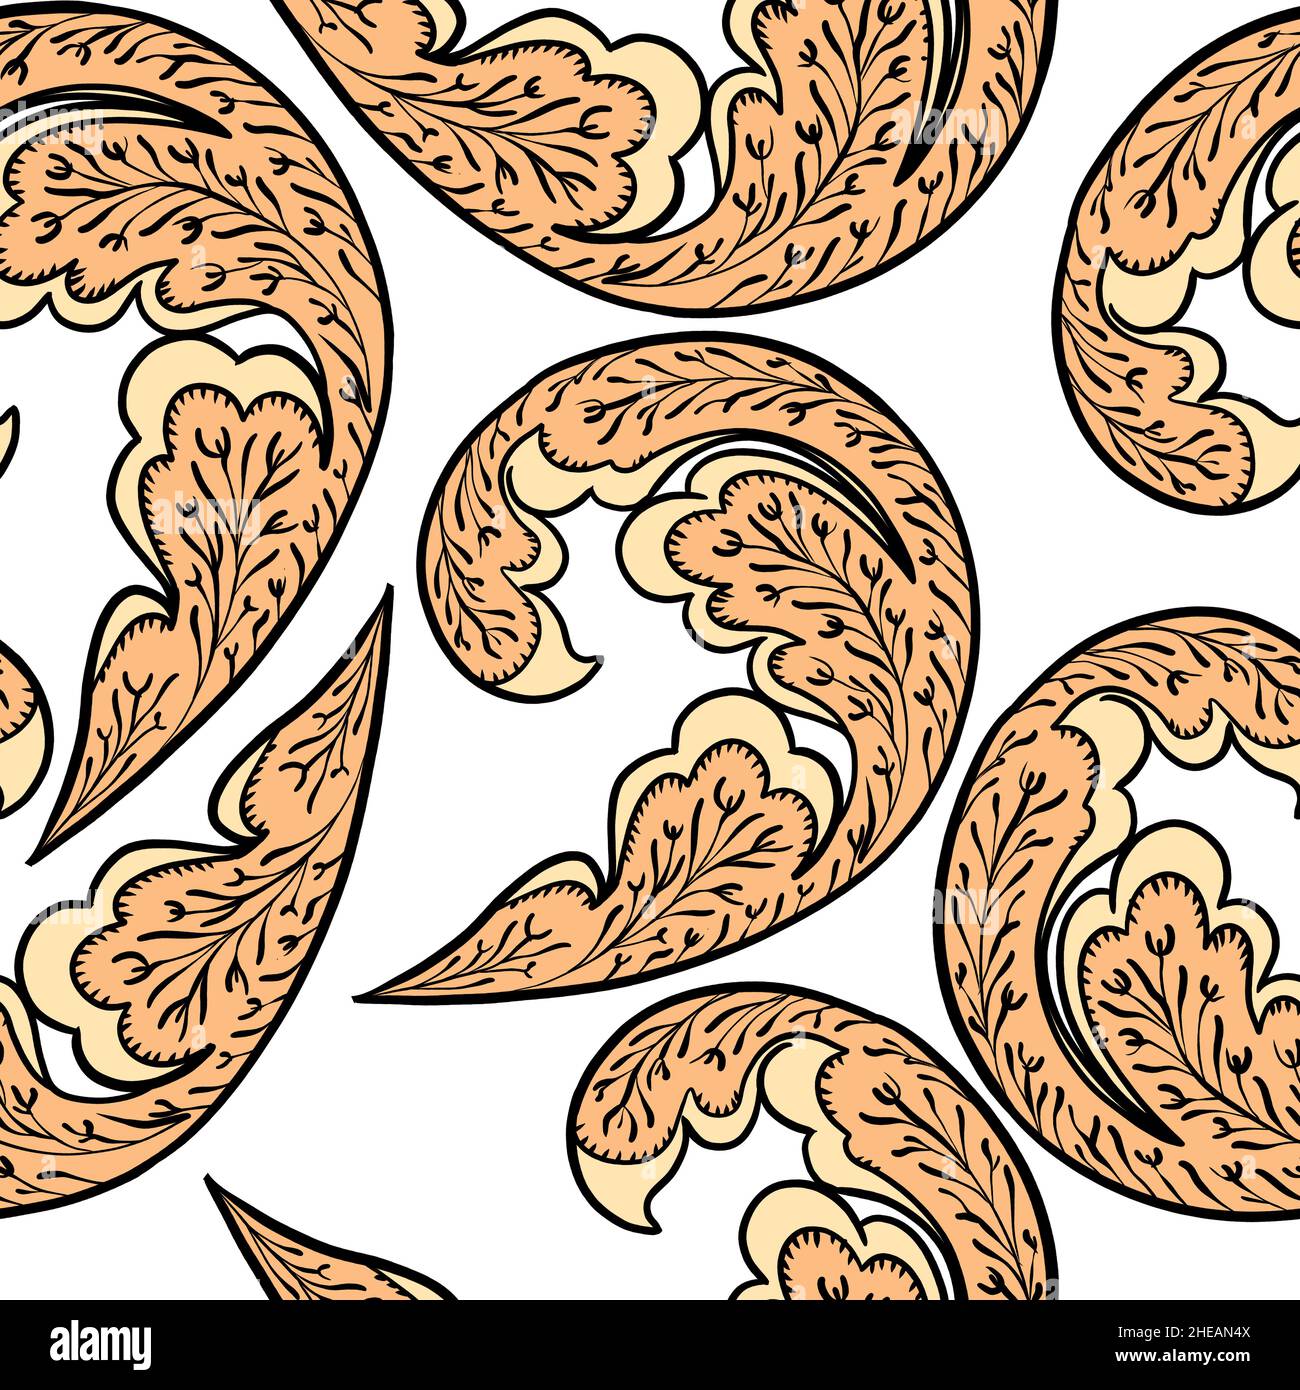 Illustration raster seamless paisley pattern with patterns on white isolated background. High quality illustration Stock Photo